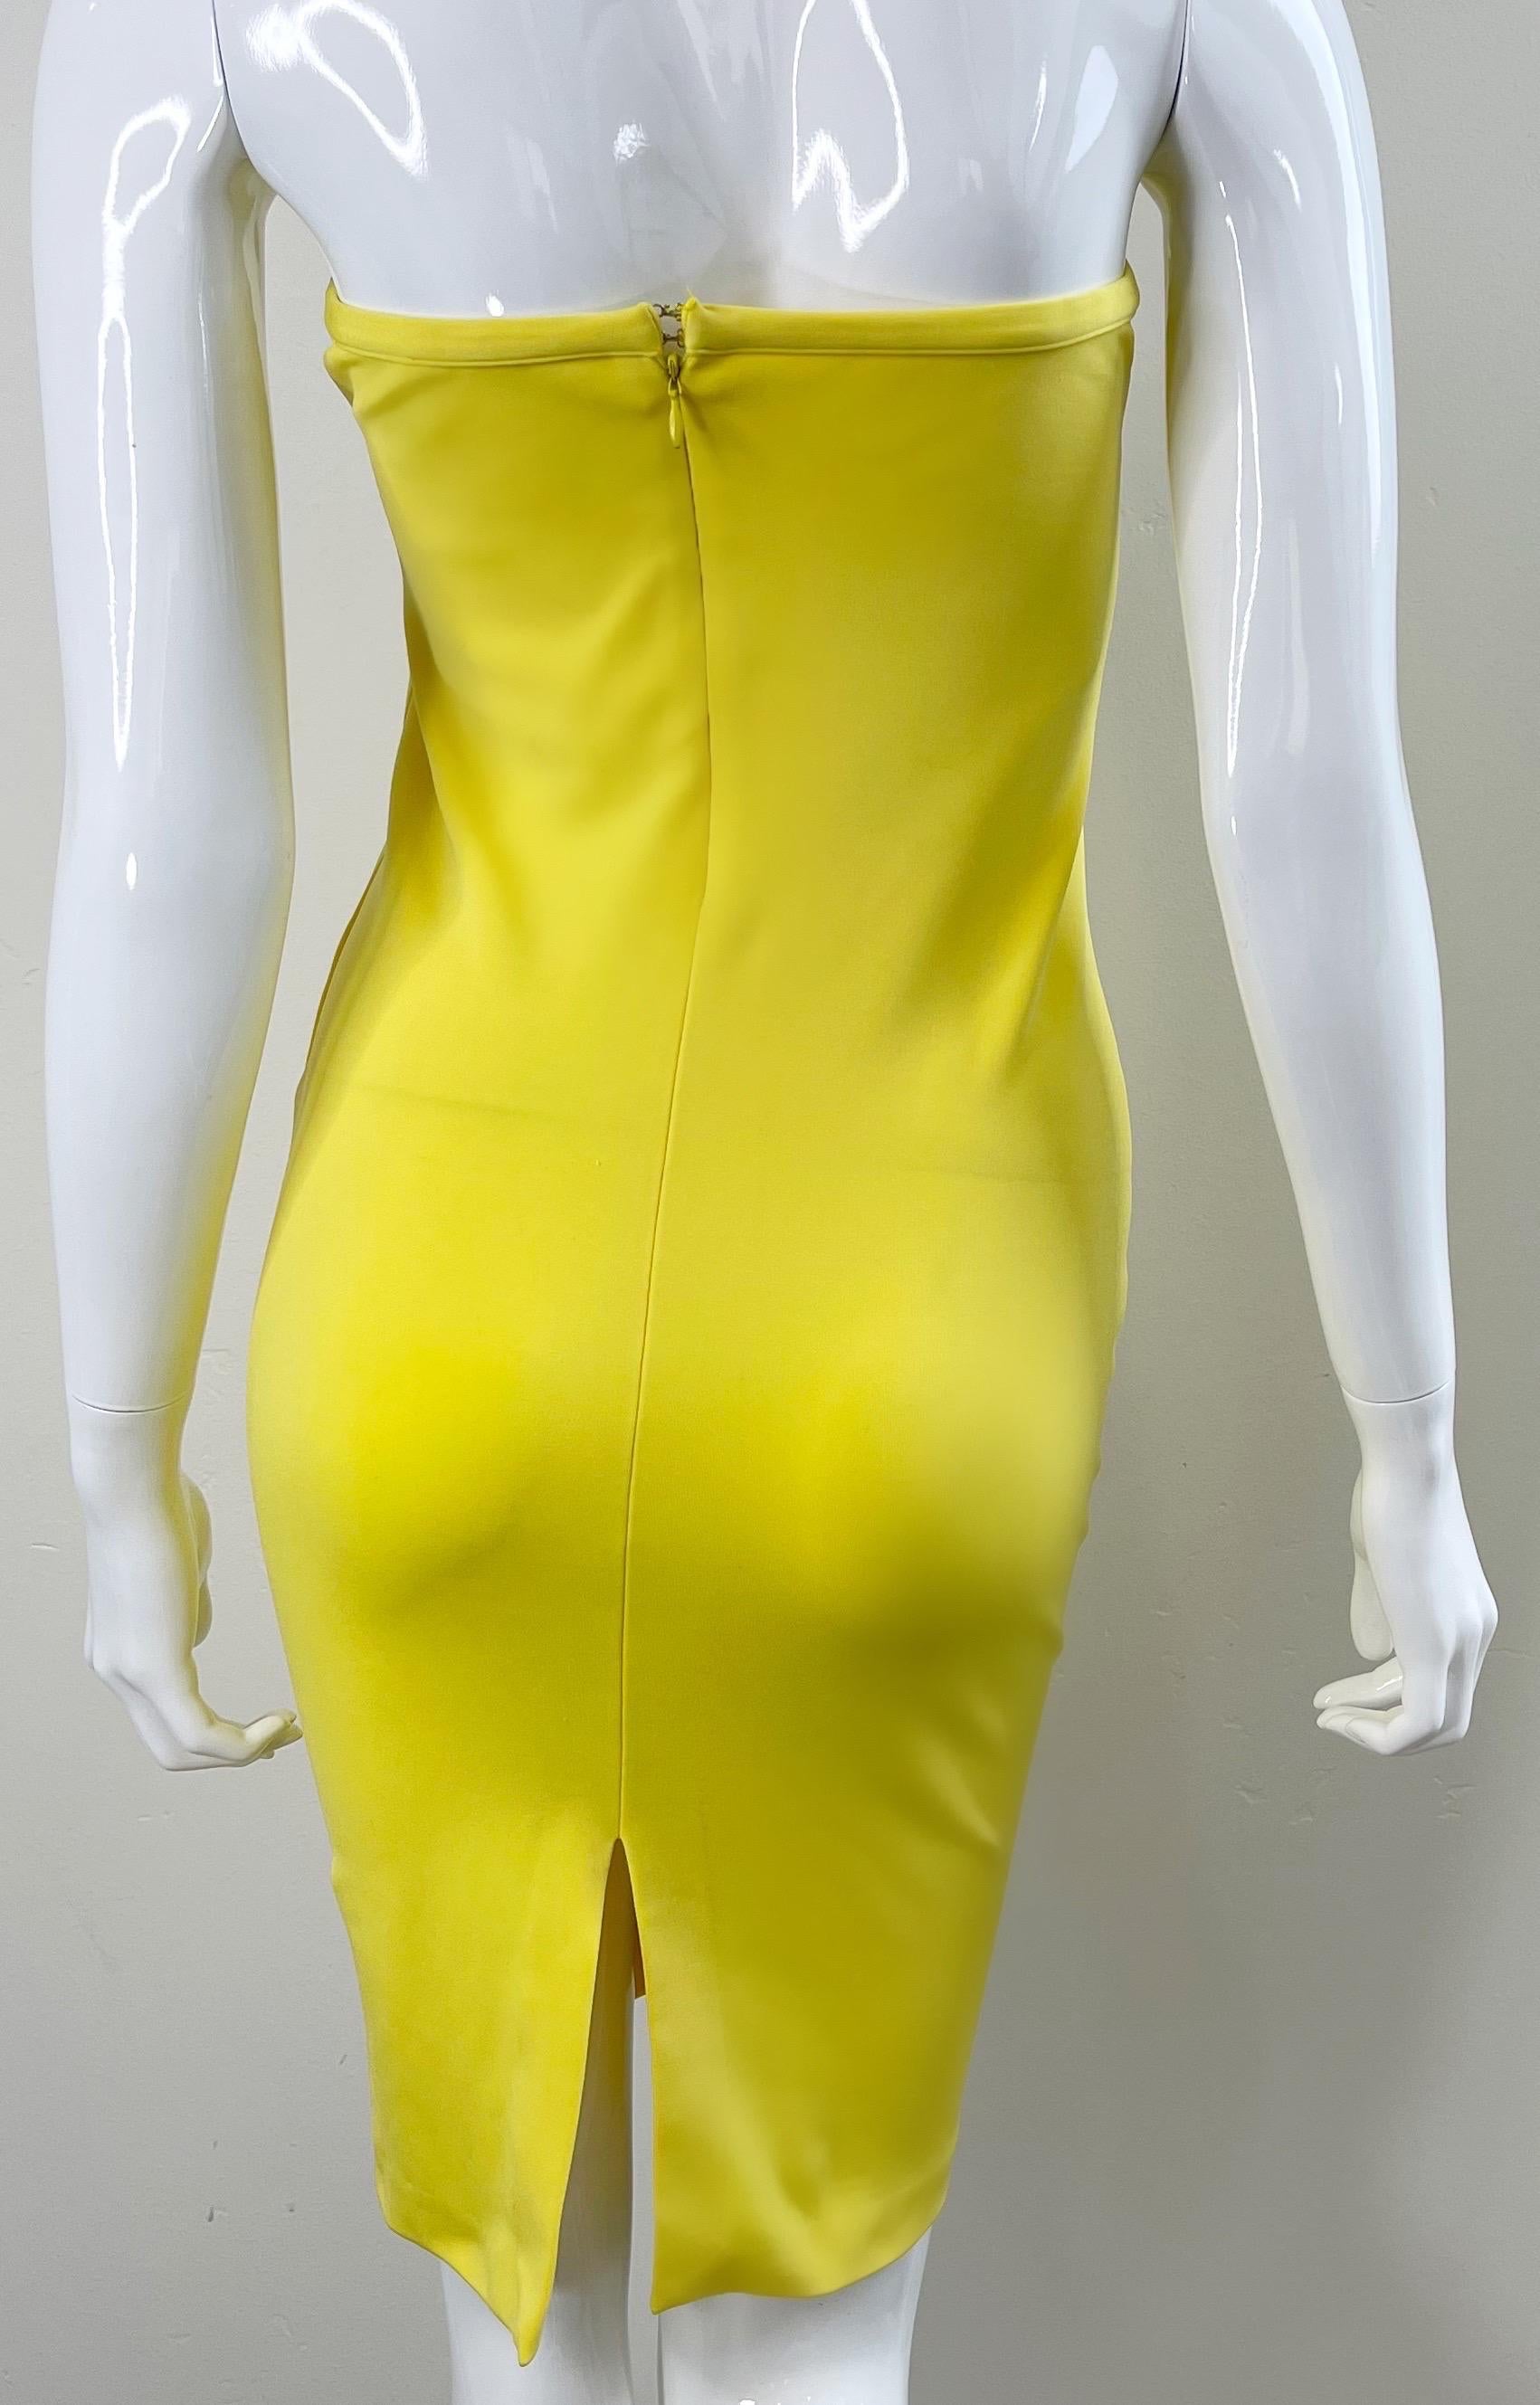 1990s Gianni Versace Versus Size 8 Canary Yellow Strapless Vintage 90s Dress For Sale 7